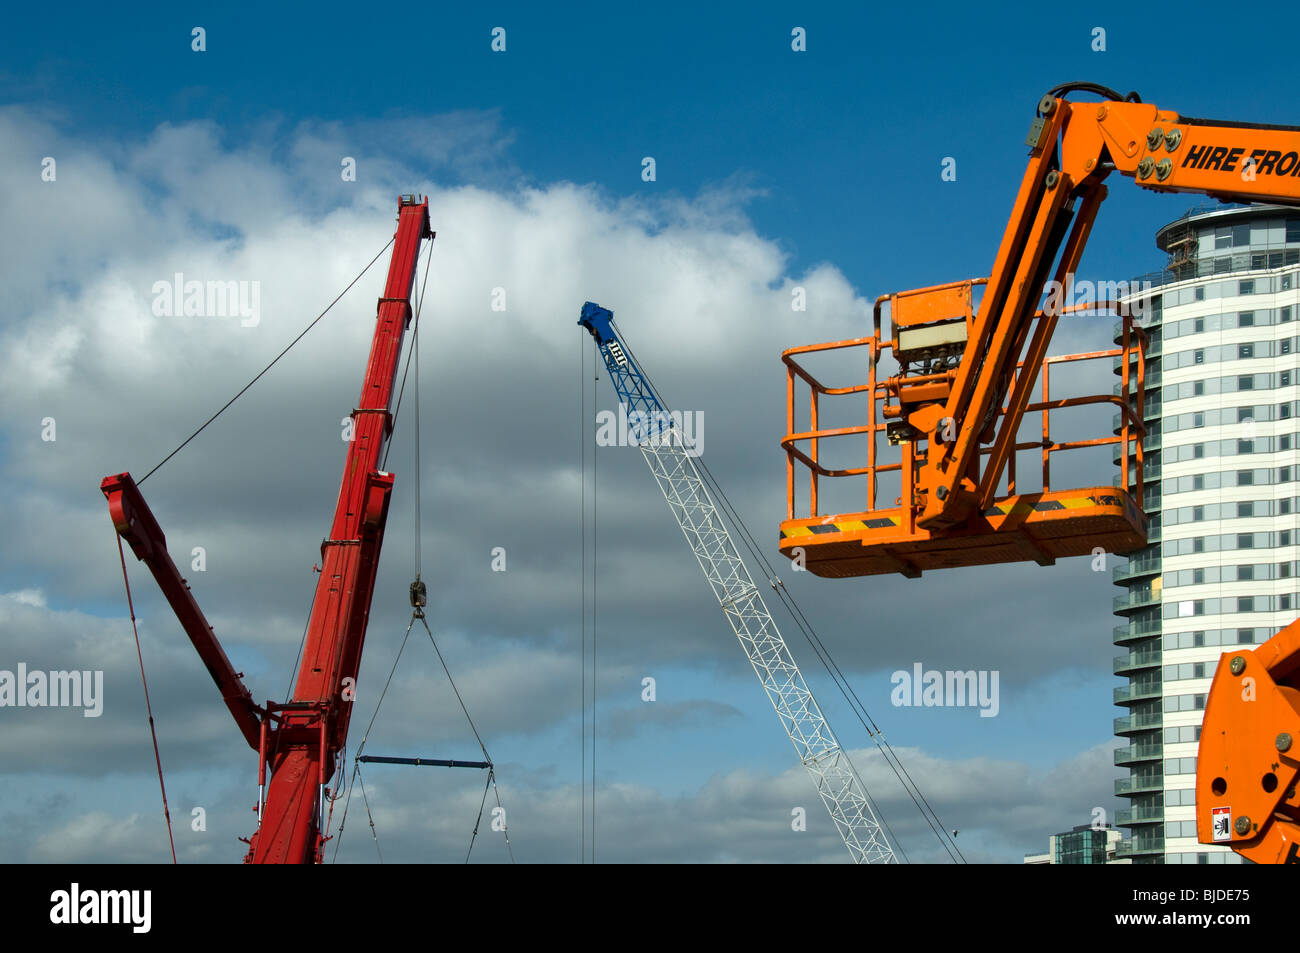 Access platform with The Heart apartment block and cranes in the background, Salford Quays, Manchester, UK Stock Photo